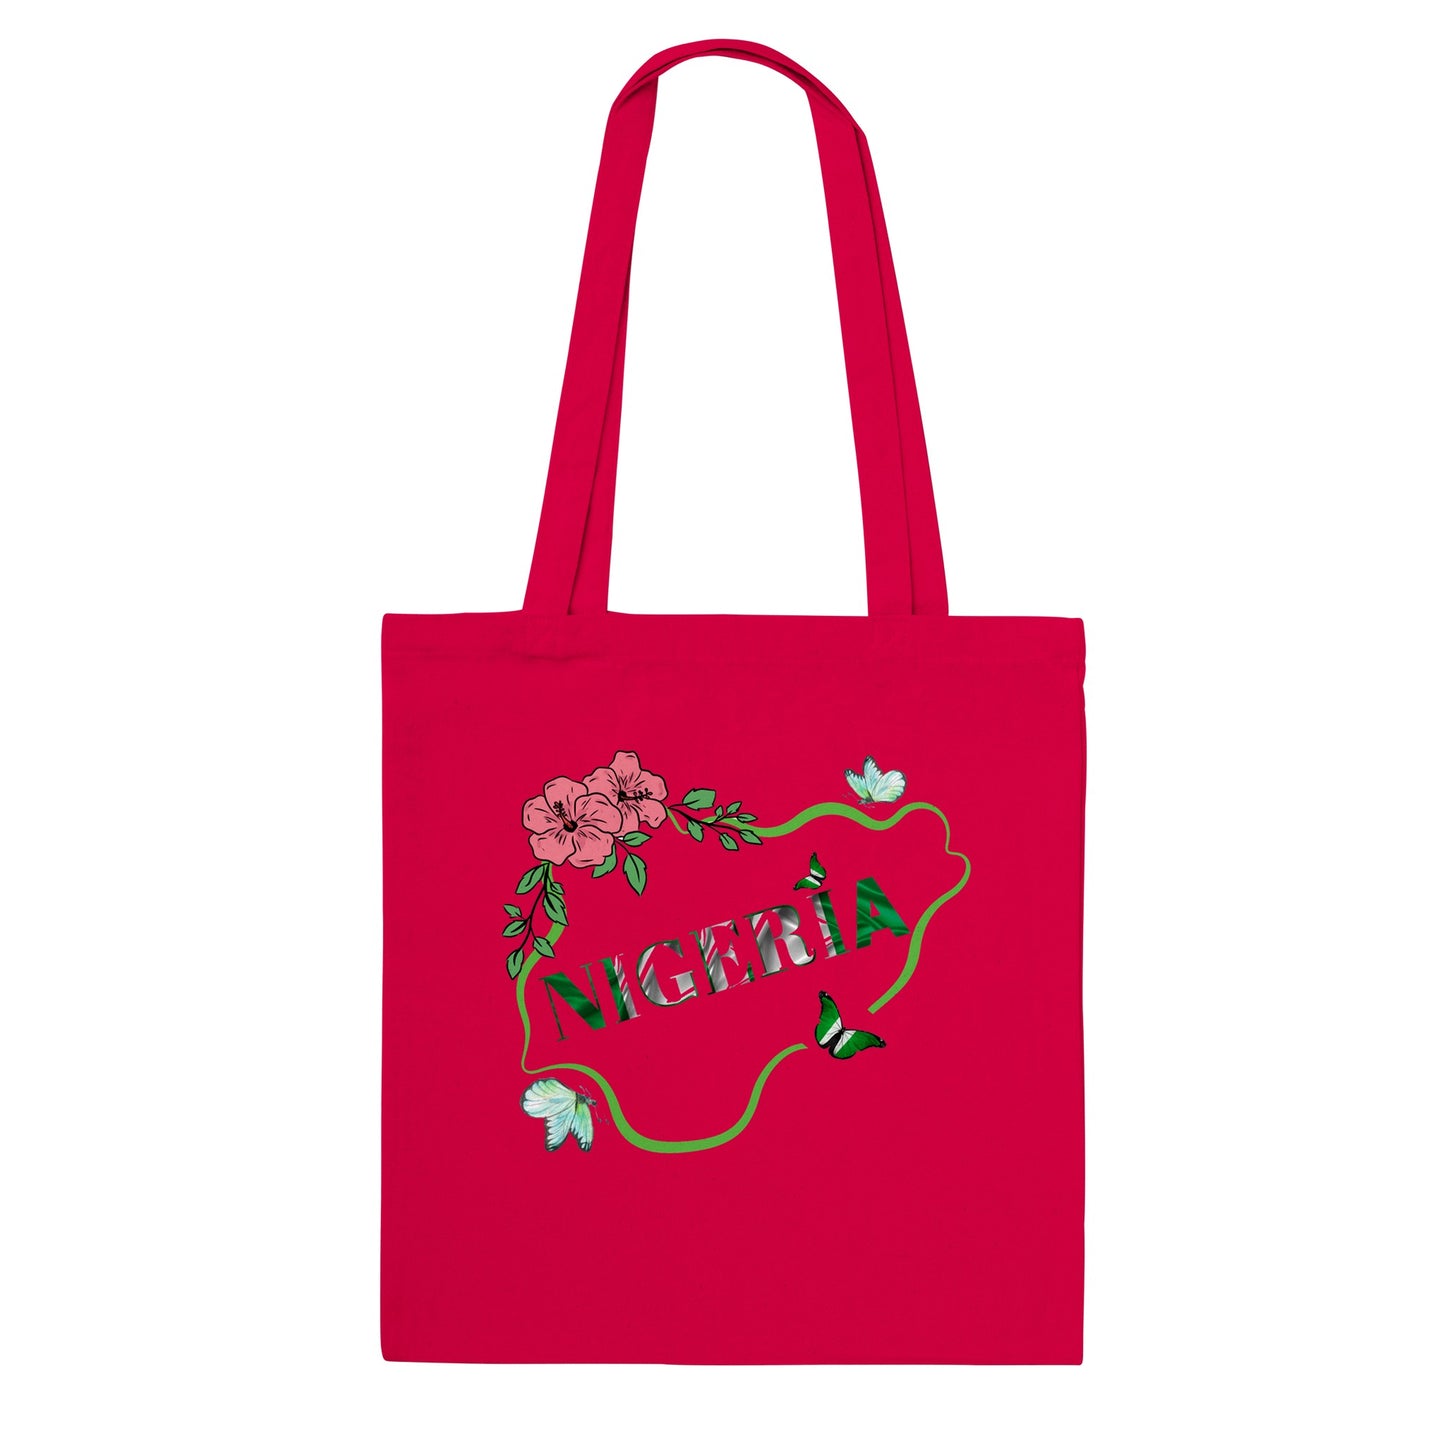 Nigeria Butterfly Classic Tote Bag